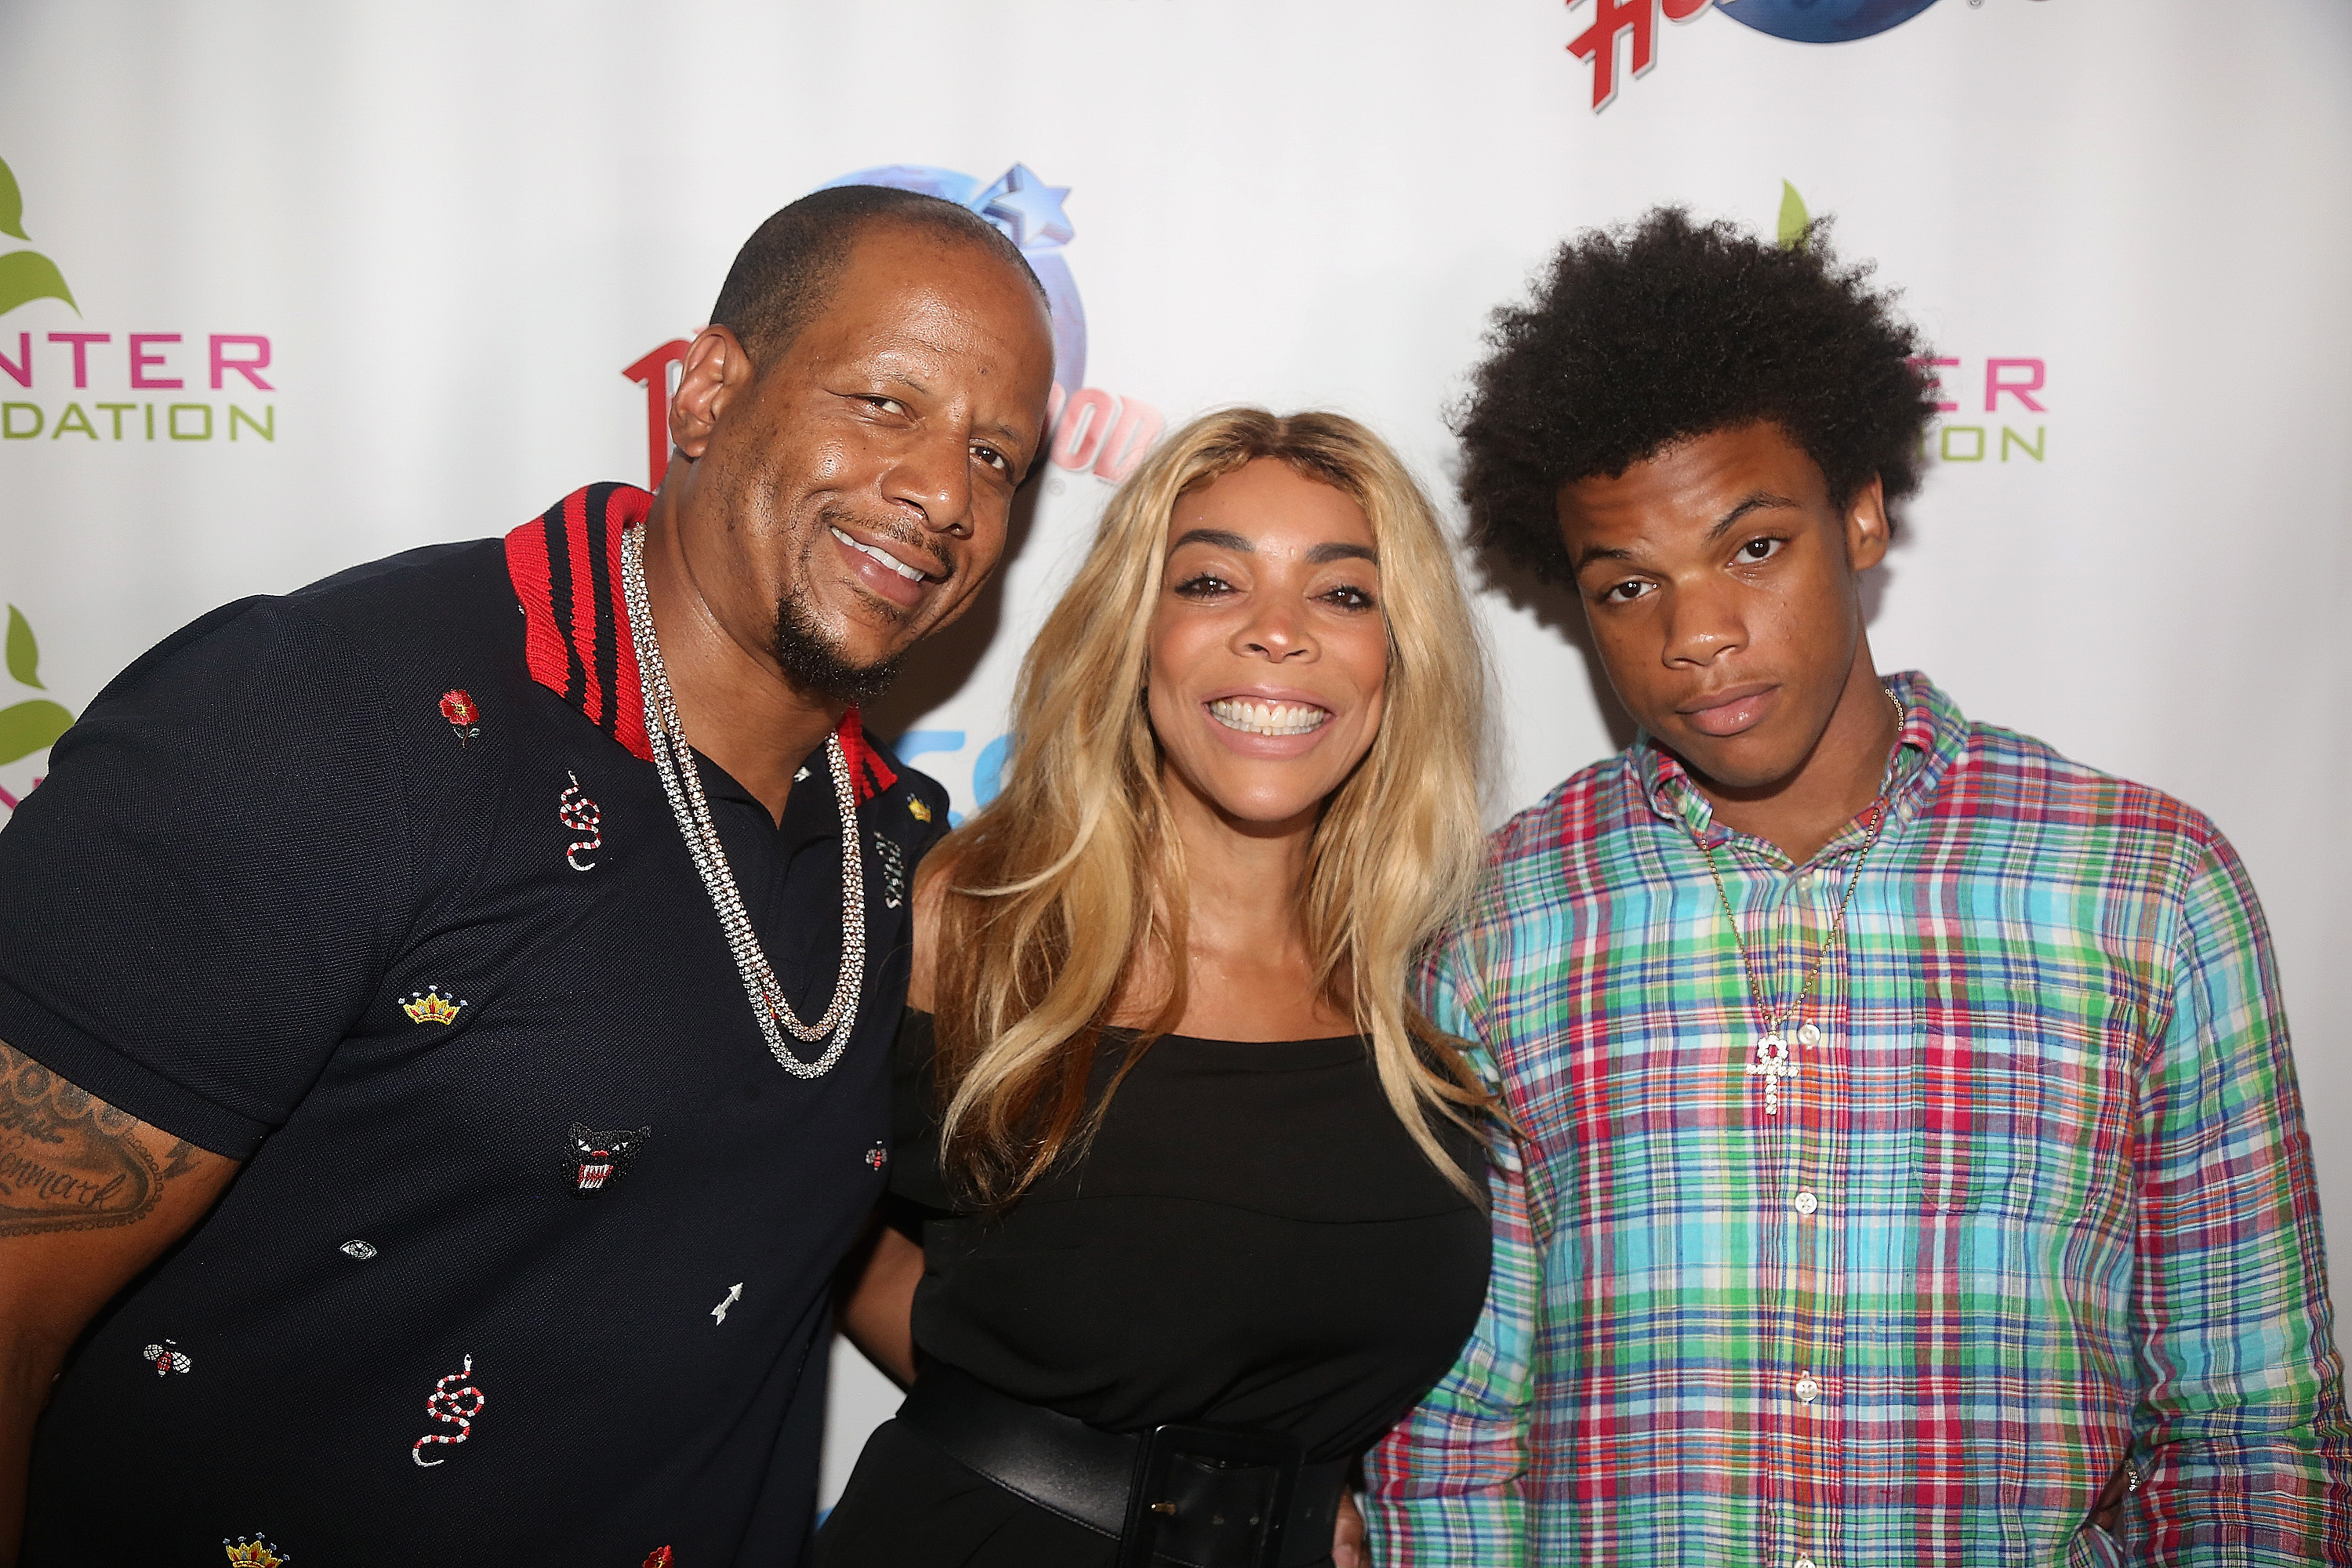 Kevin Hunter Sr., his wife Wendy Williams, and their son Kevin Hunter Jr. at a celebration for The Hunter Foundation Charity on July 11, 2017, in New York City | Source: Getty Images